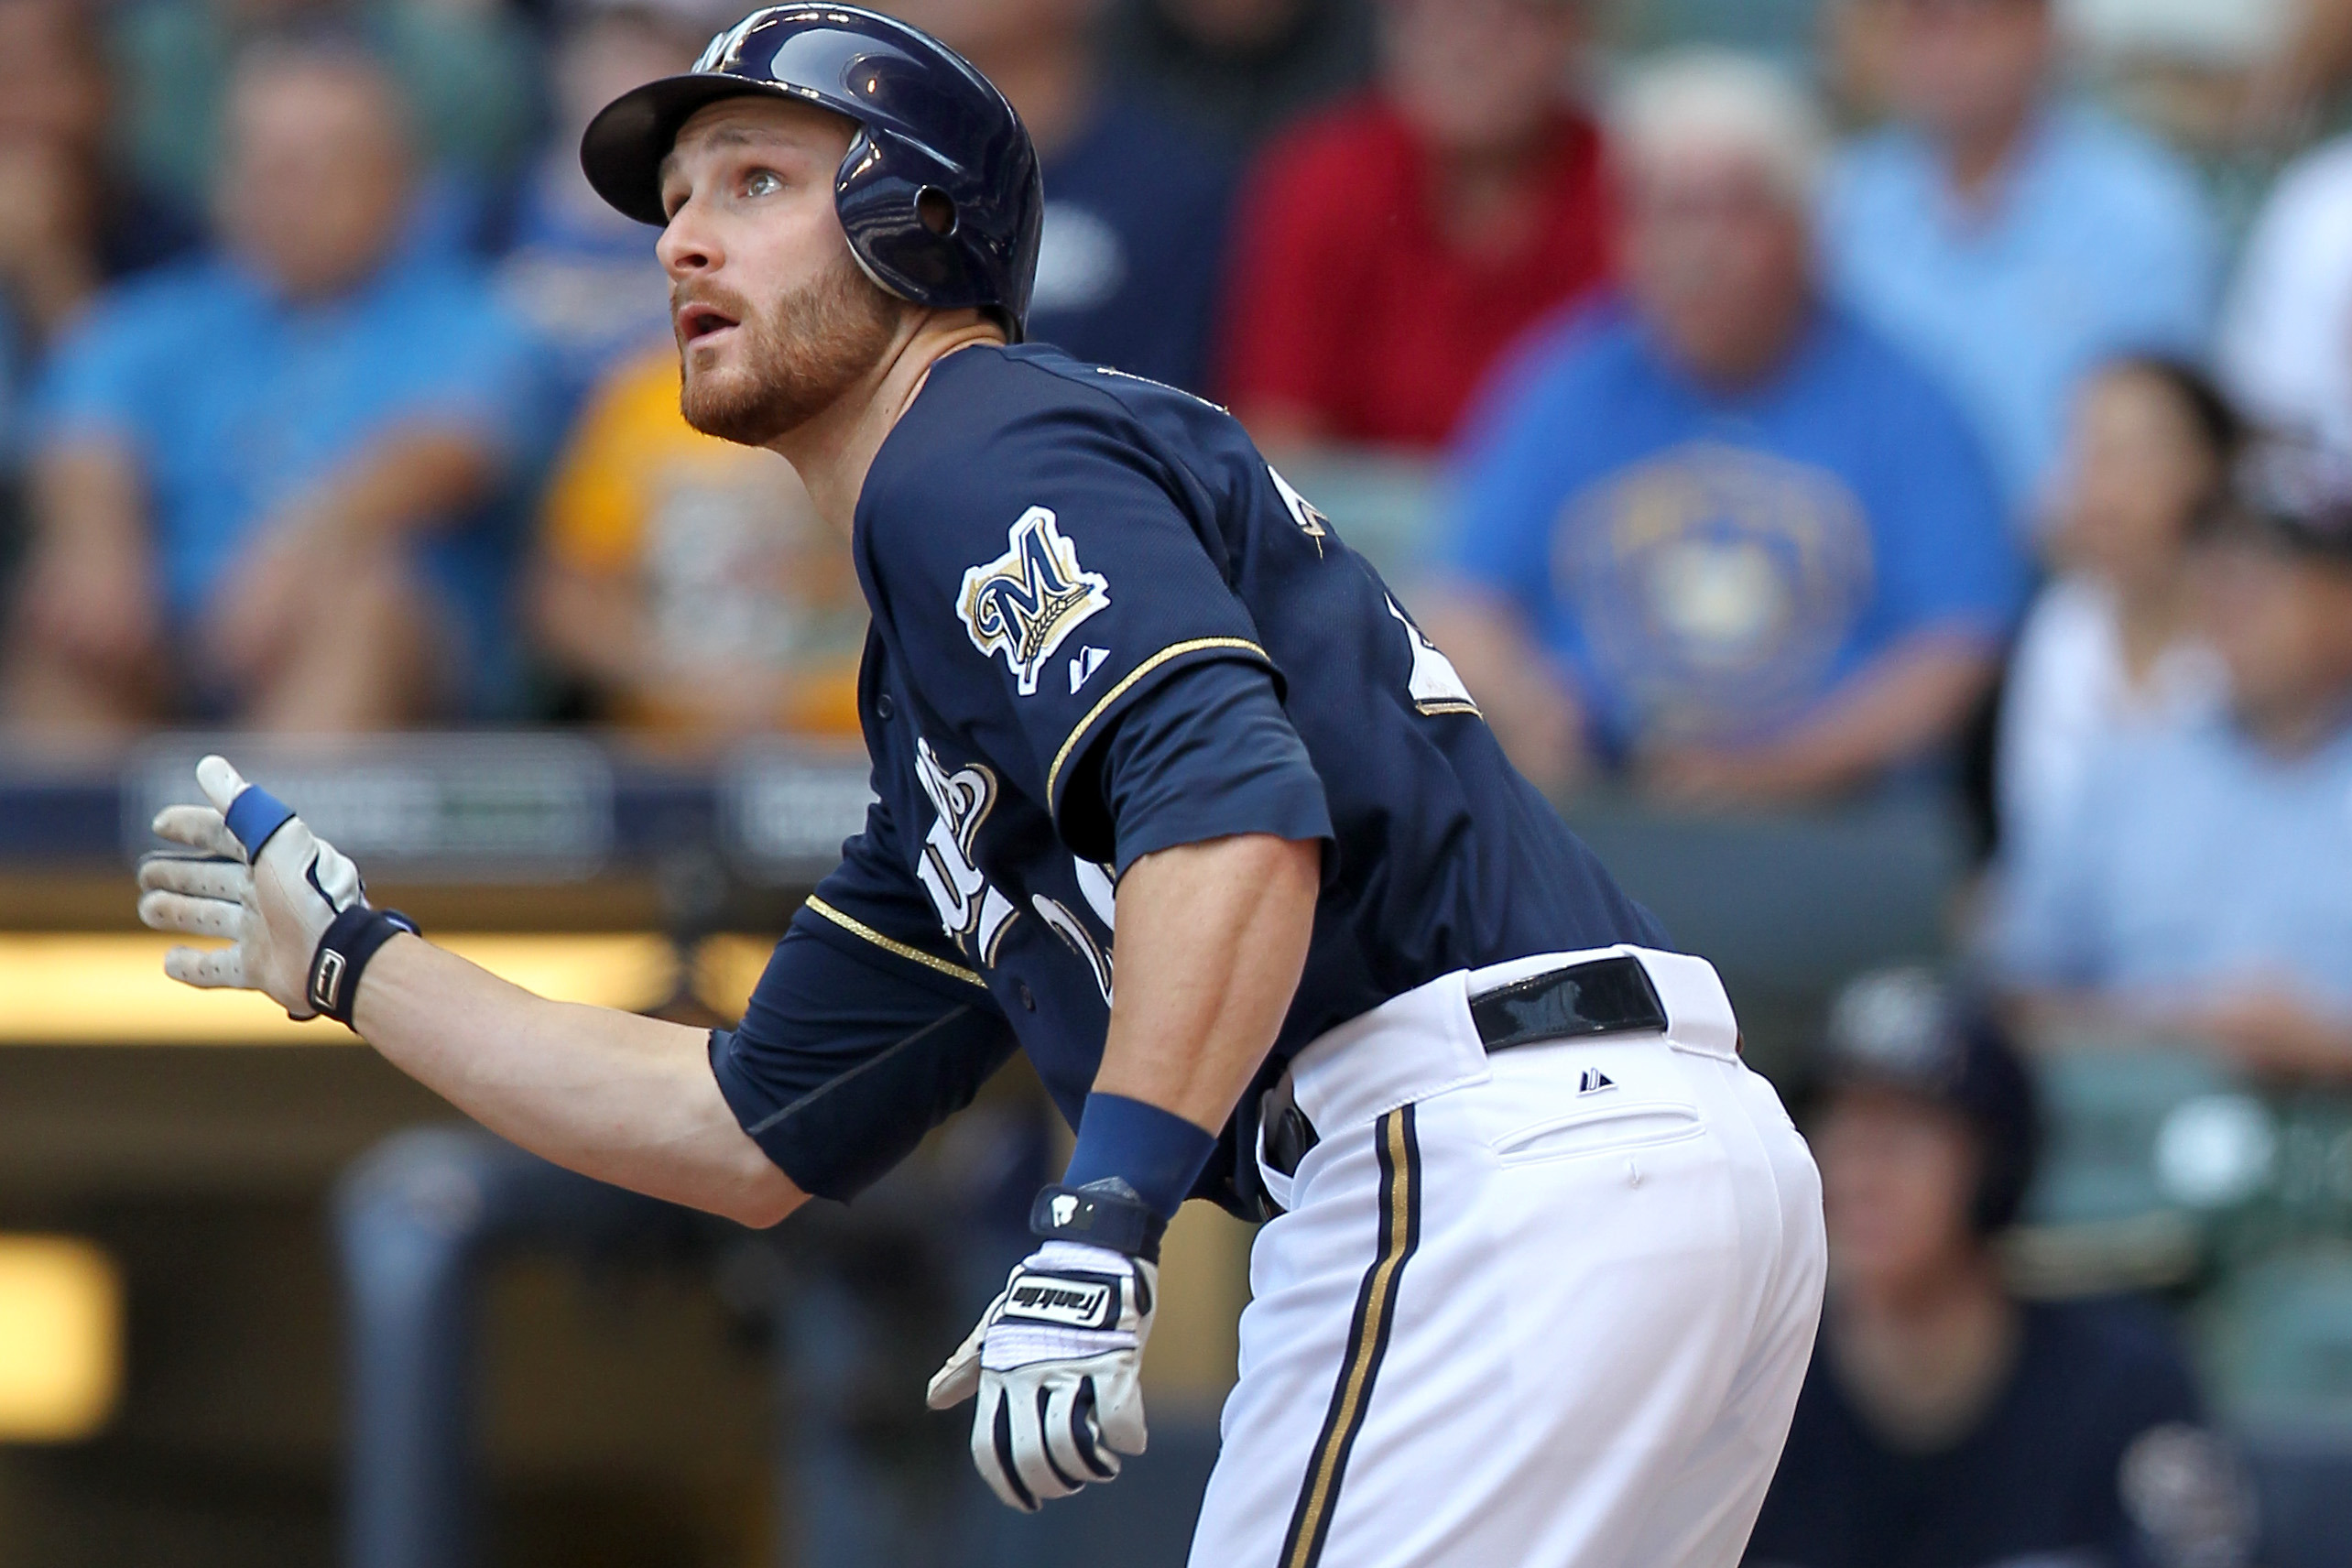 Red Sox reportedly agree to deal with veteran catcher Jonathan Lucroy